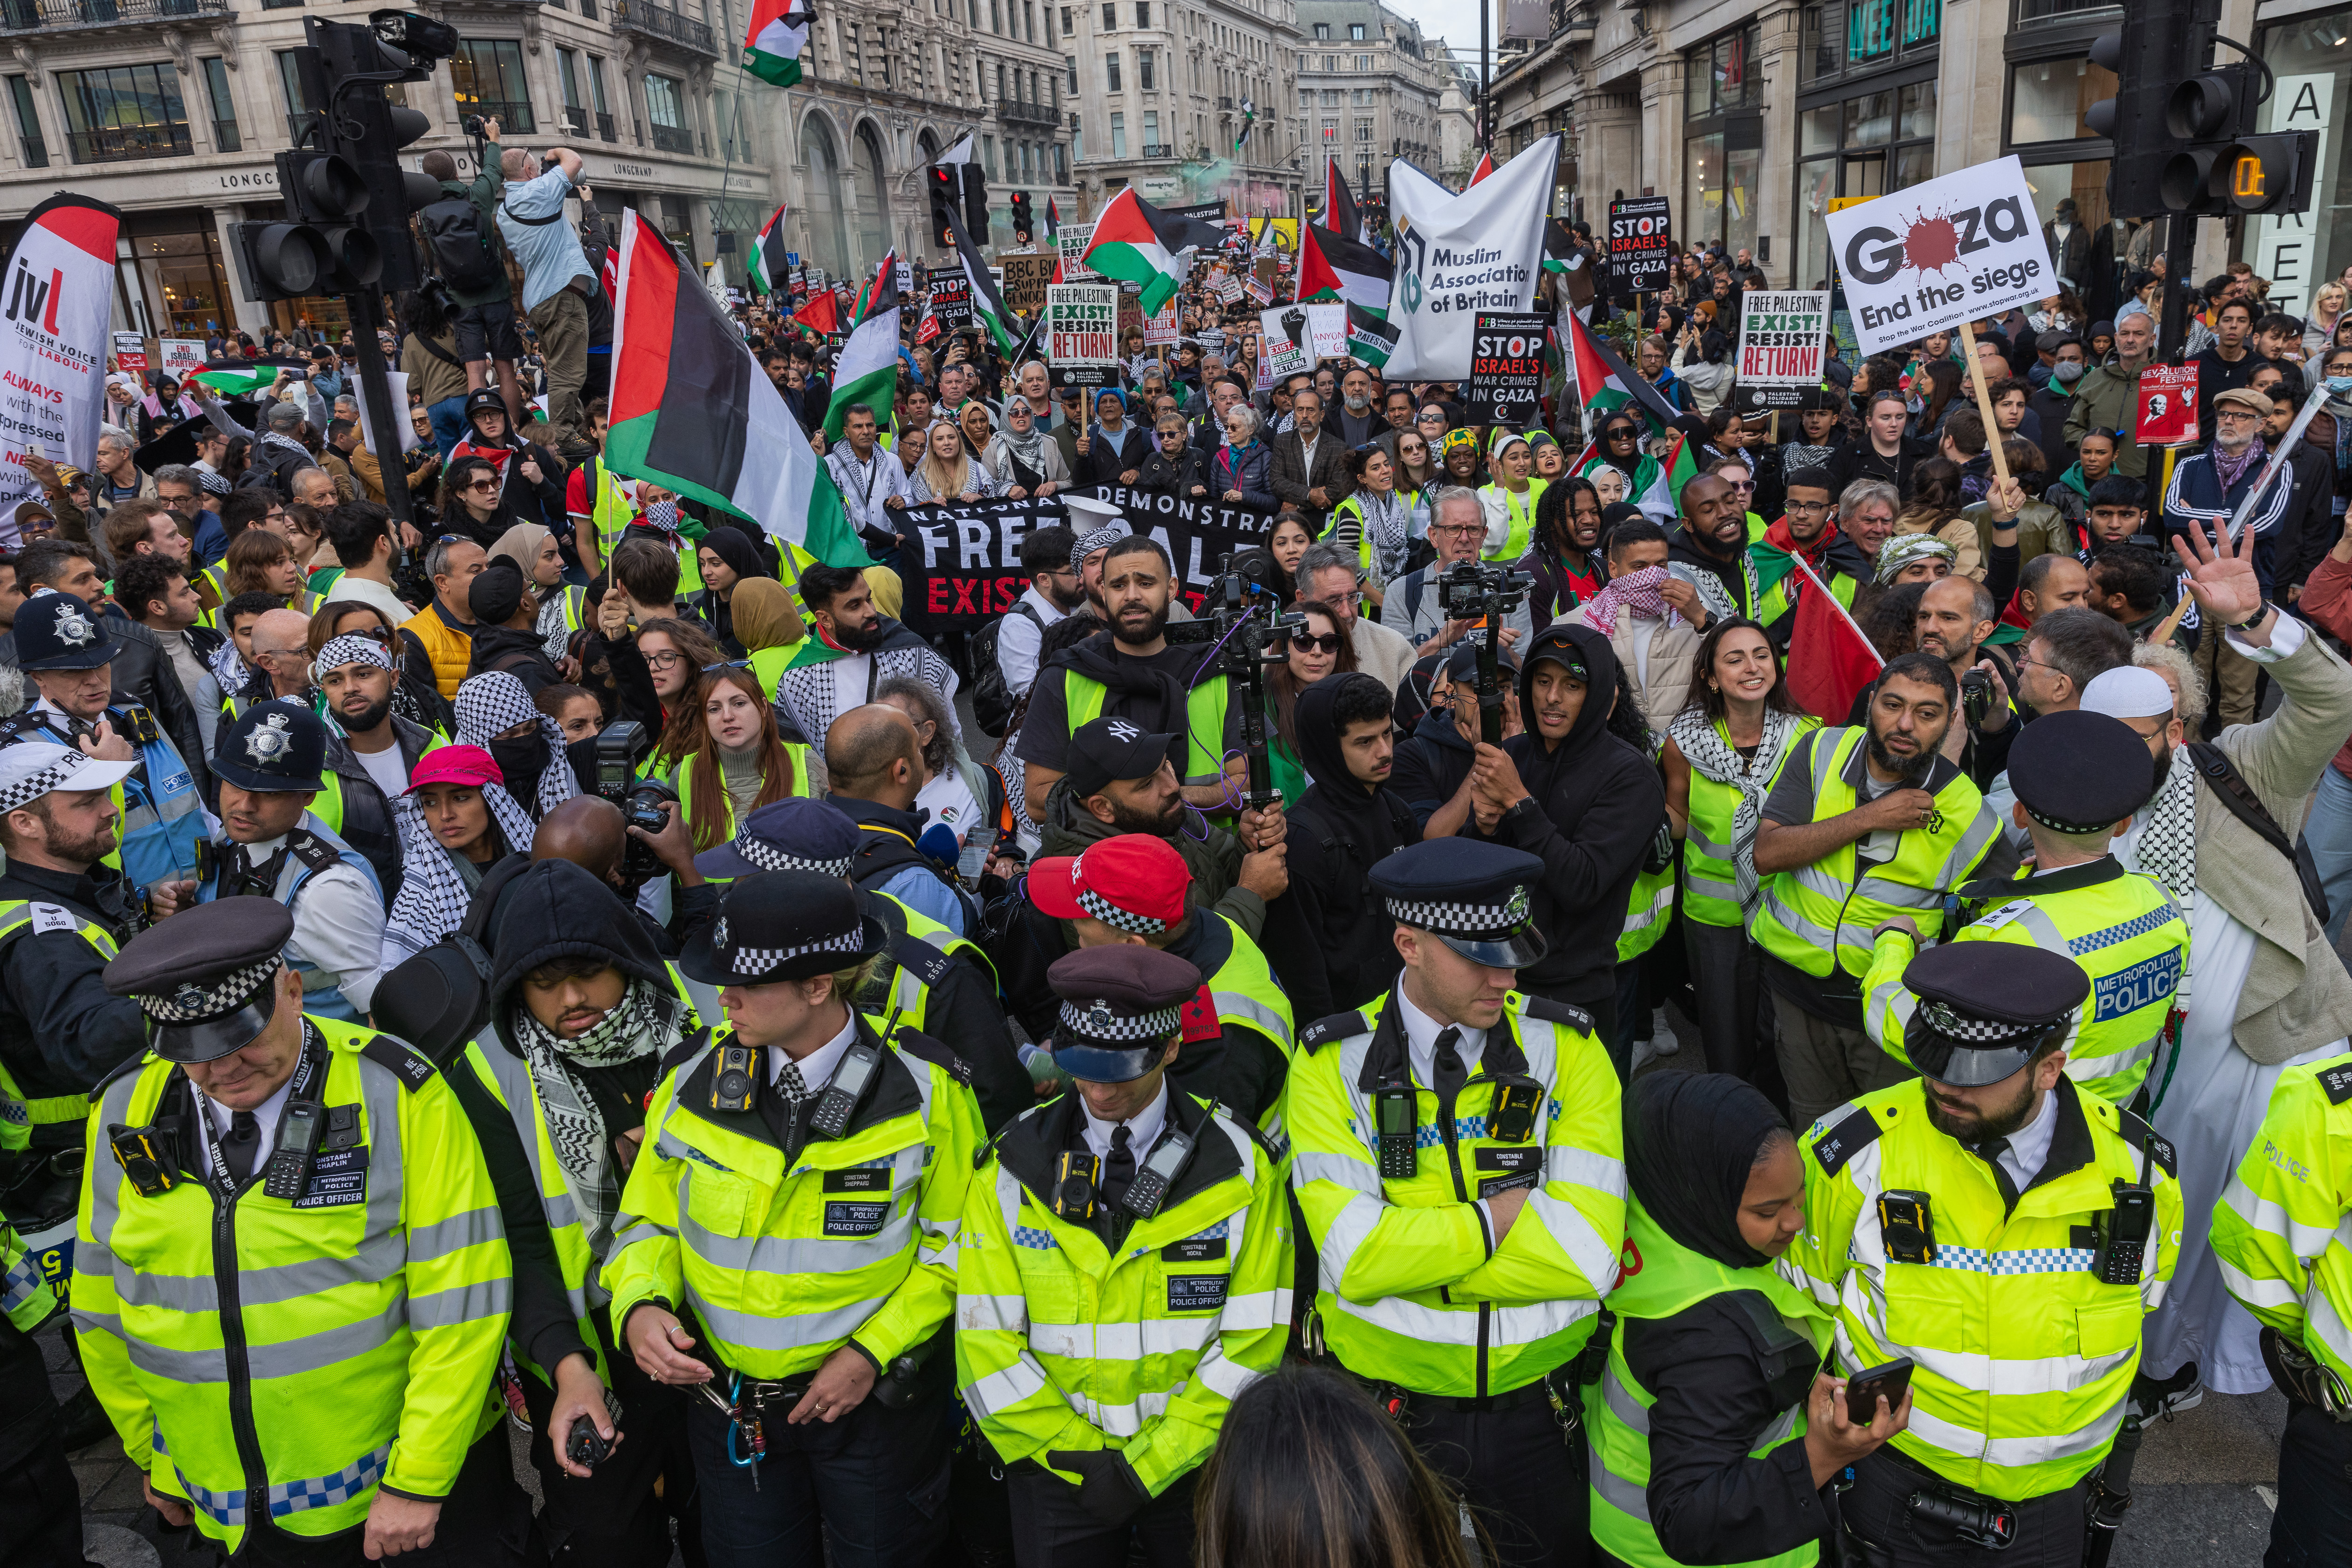 Who are the Palestinian and Jewish-led groups leading the protests